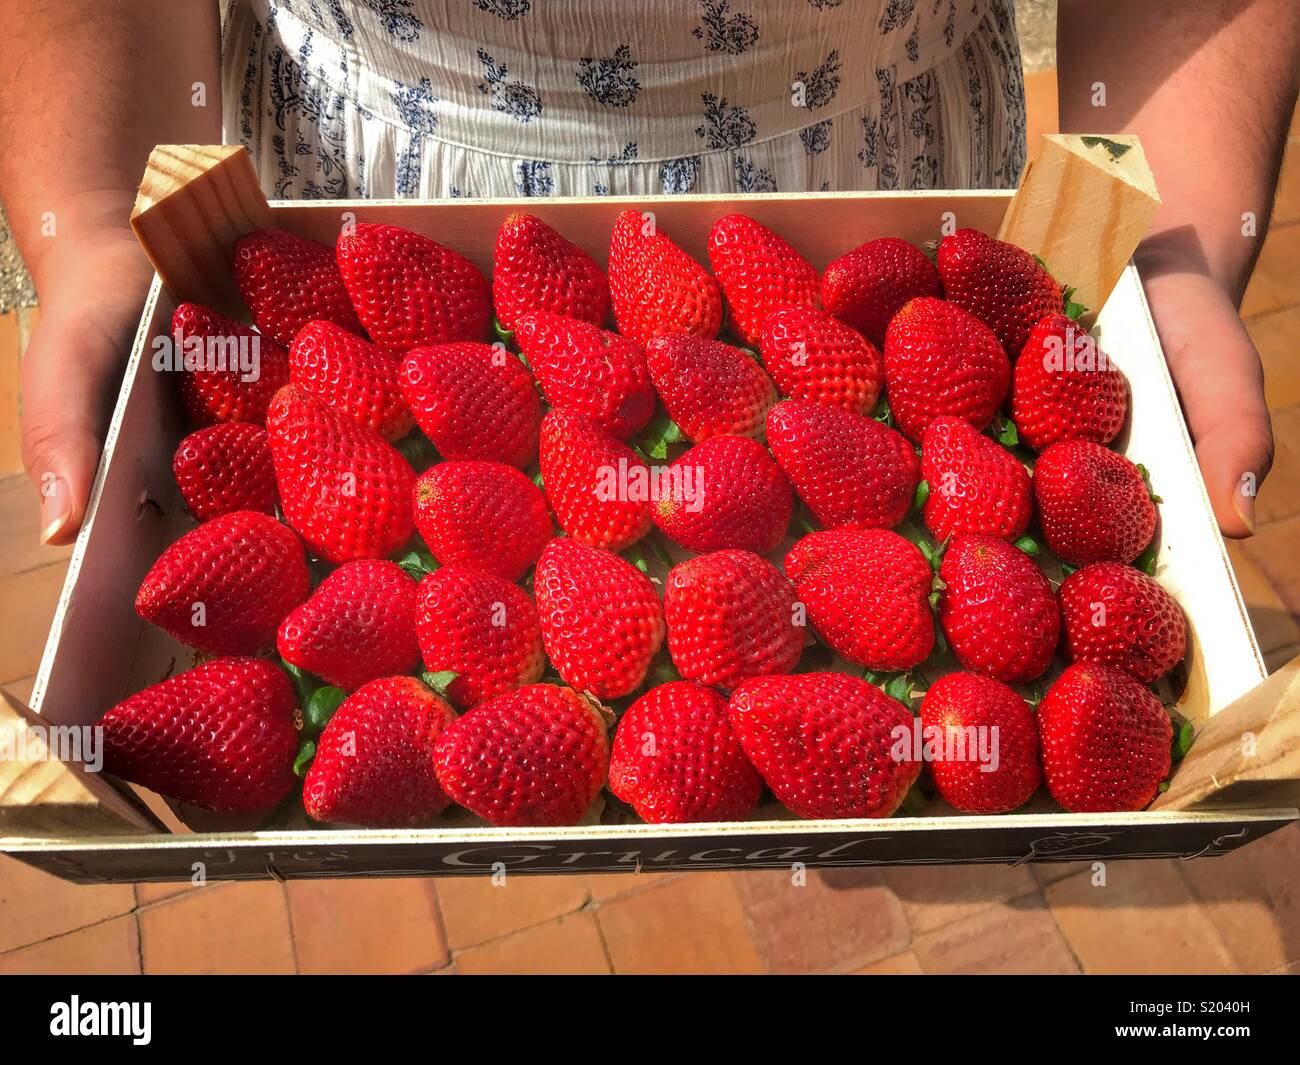 Millennial woman holding a box of fresh, ripe, red strawberries, high angle view Stock Photo